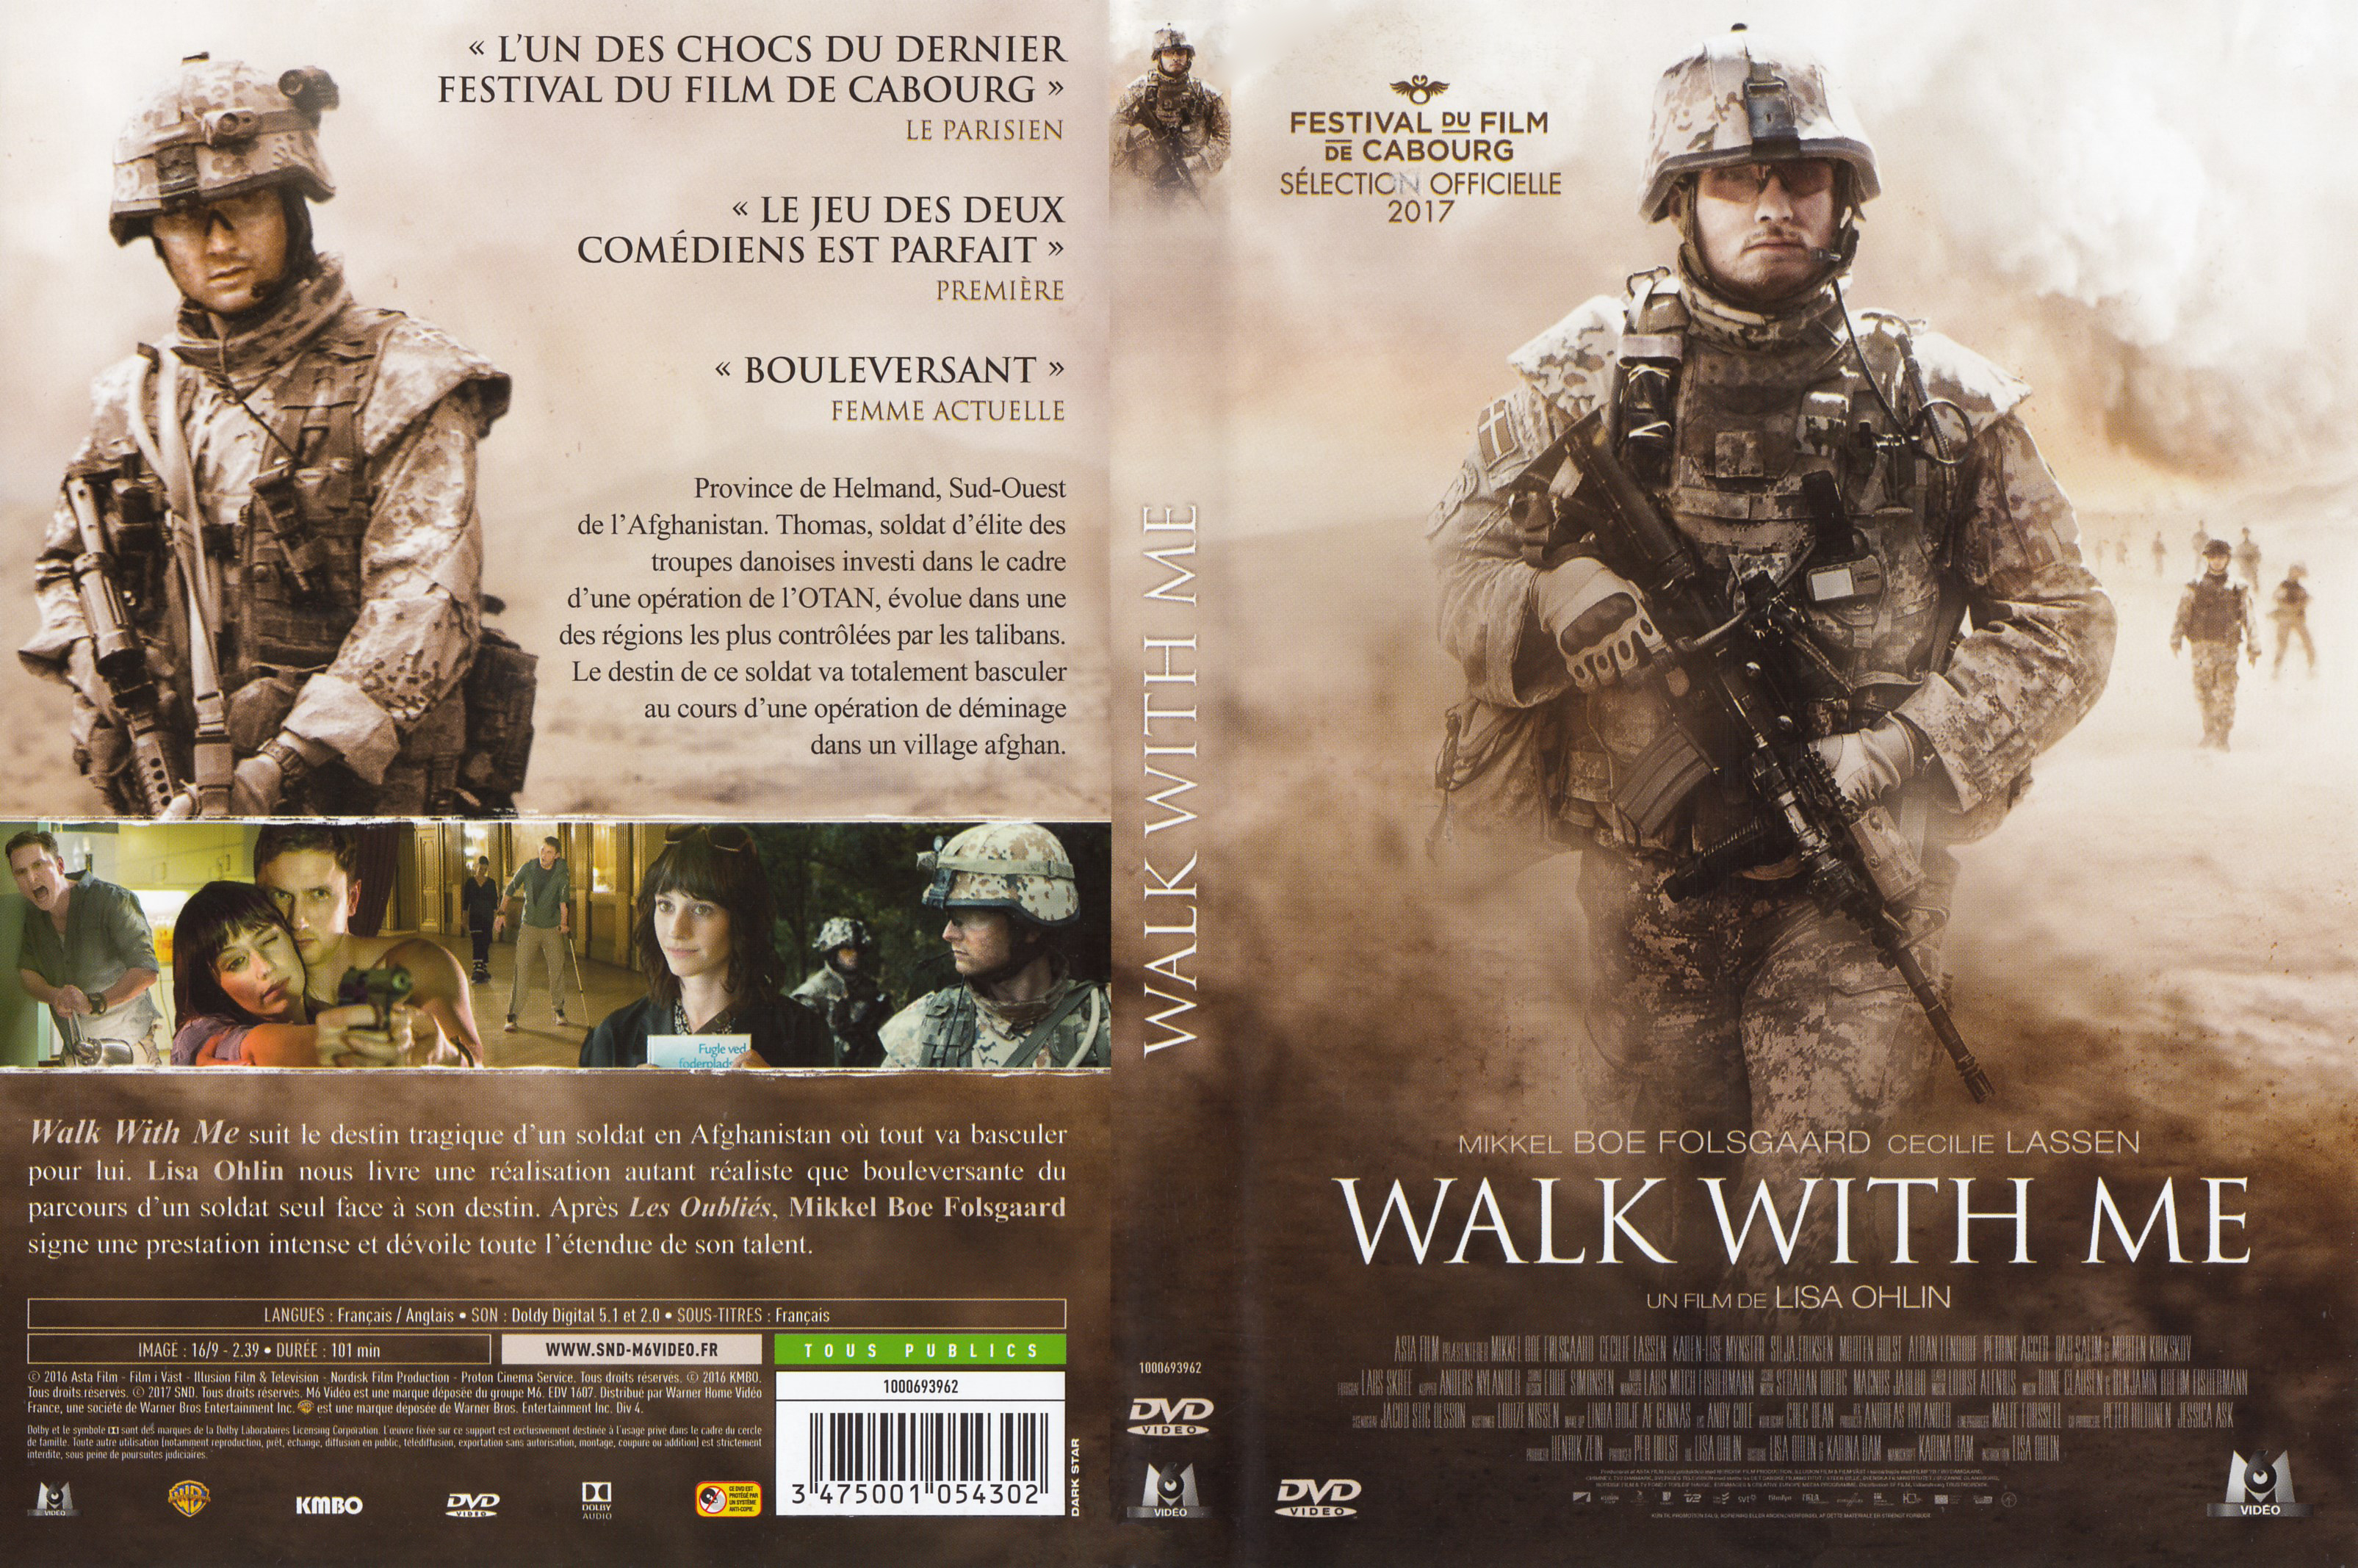 Jaquette DVD Walk with me